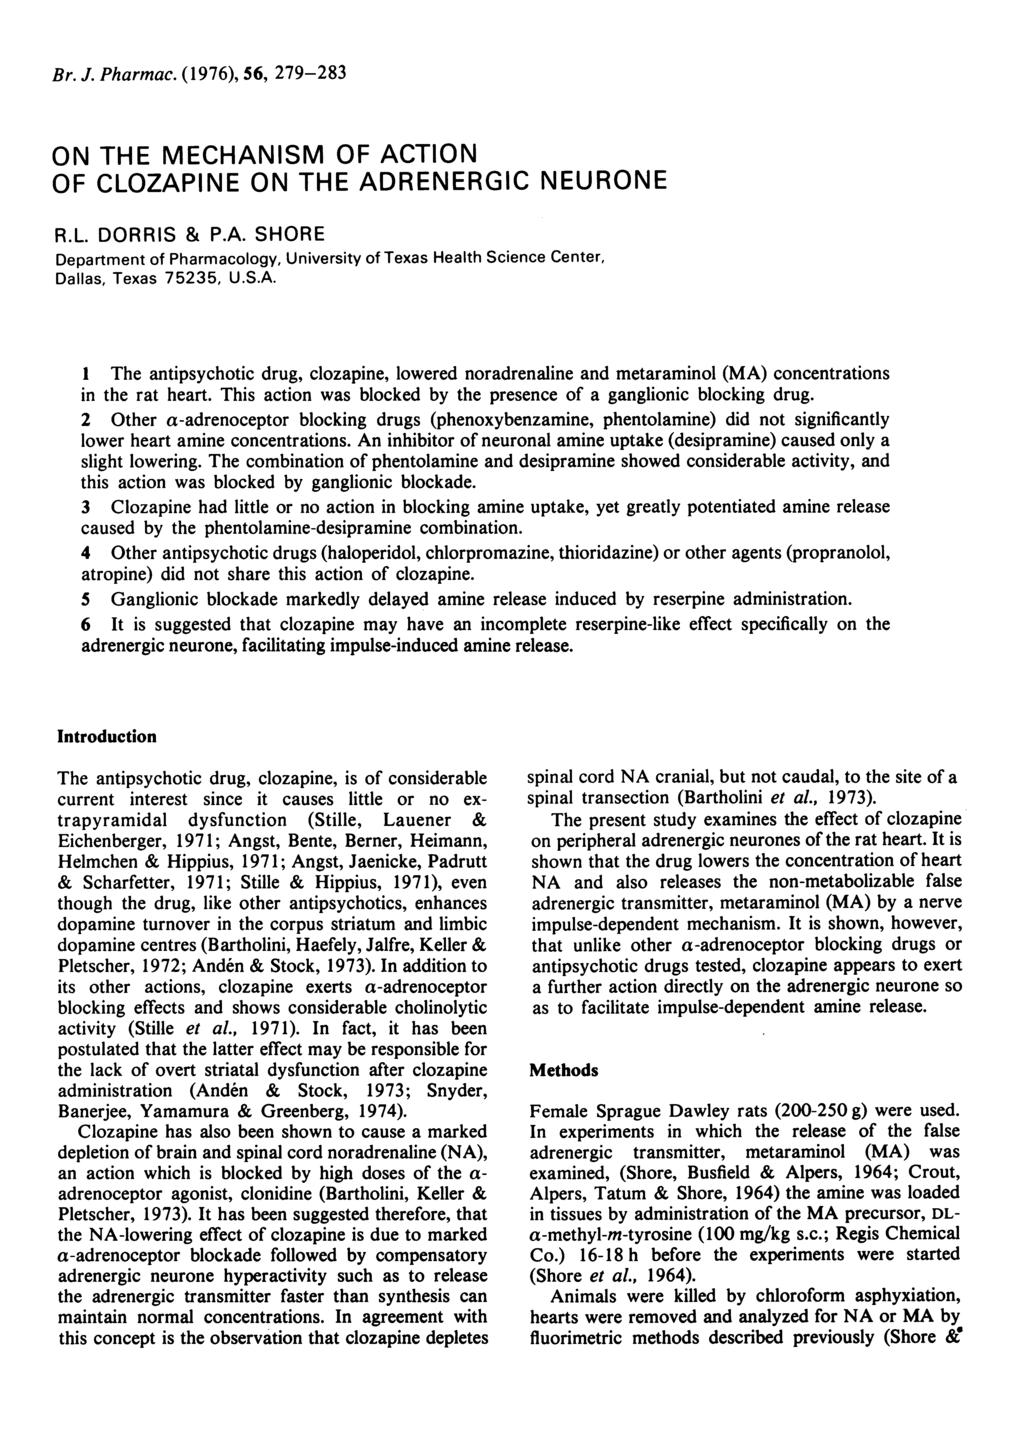 Br. J. Pharmac. (1976), 56, 279-283 ON THE MECHANISM OF ACTION OF CLOZAPINE ON THE ADRENERGIC NEURONE R.L. DORRIS & P.A. SHORE Department of Pharmacology, University of Texas Health Science Center, Dallas, Texas 75235, U.